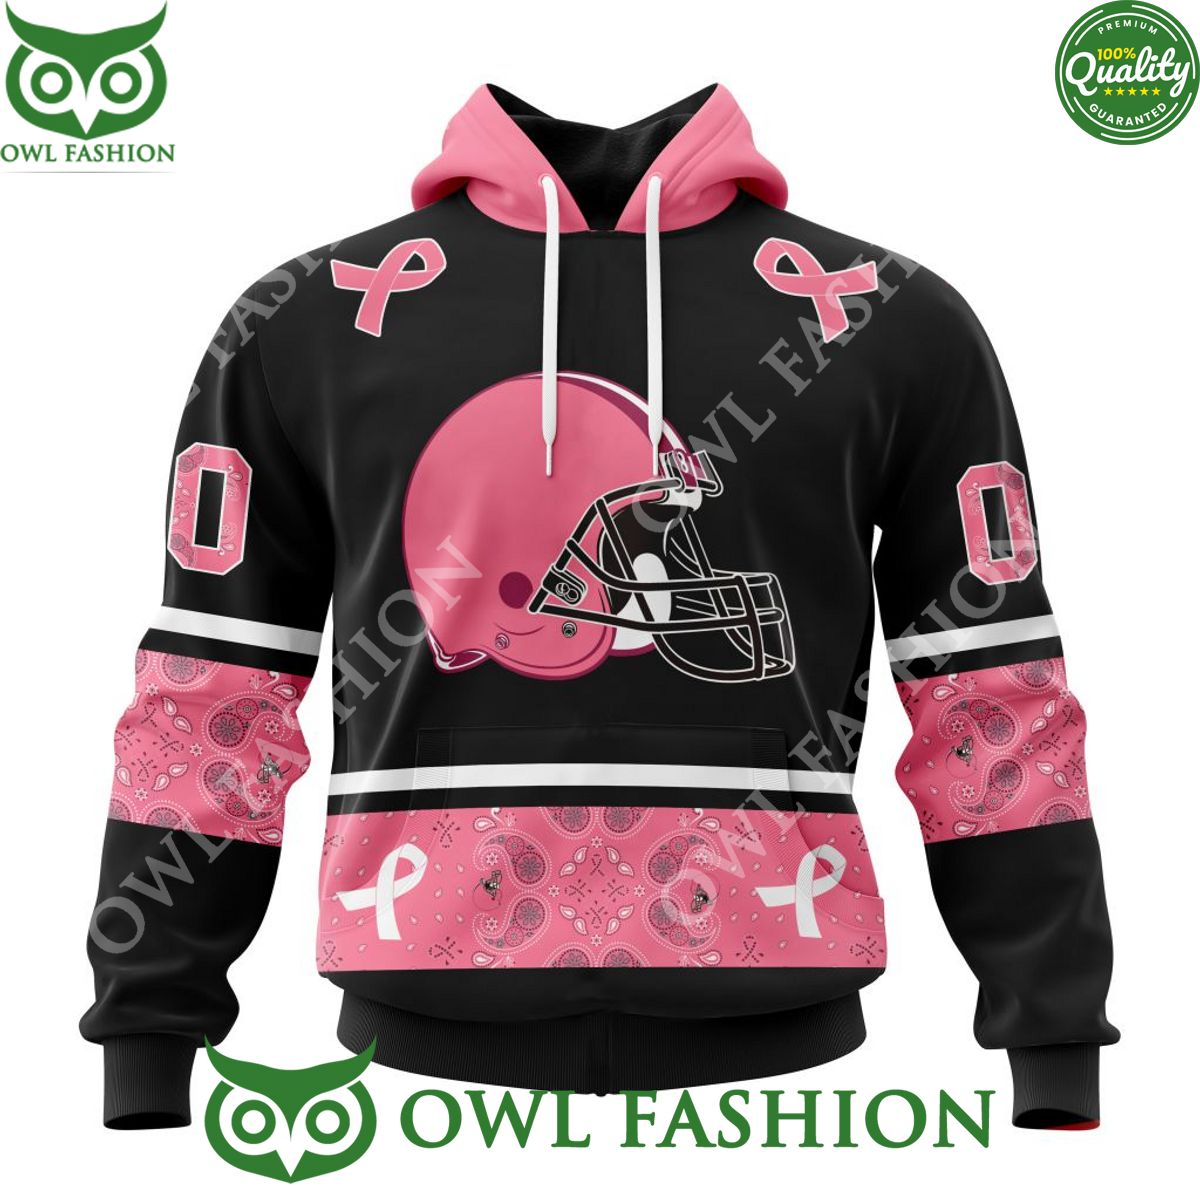 Customized NFL Cleveland Browns Pink Breast Cancer 3D Hoodie Shirt